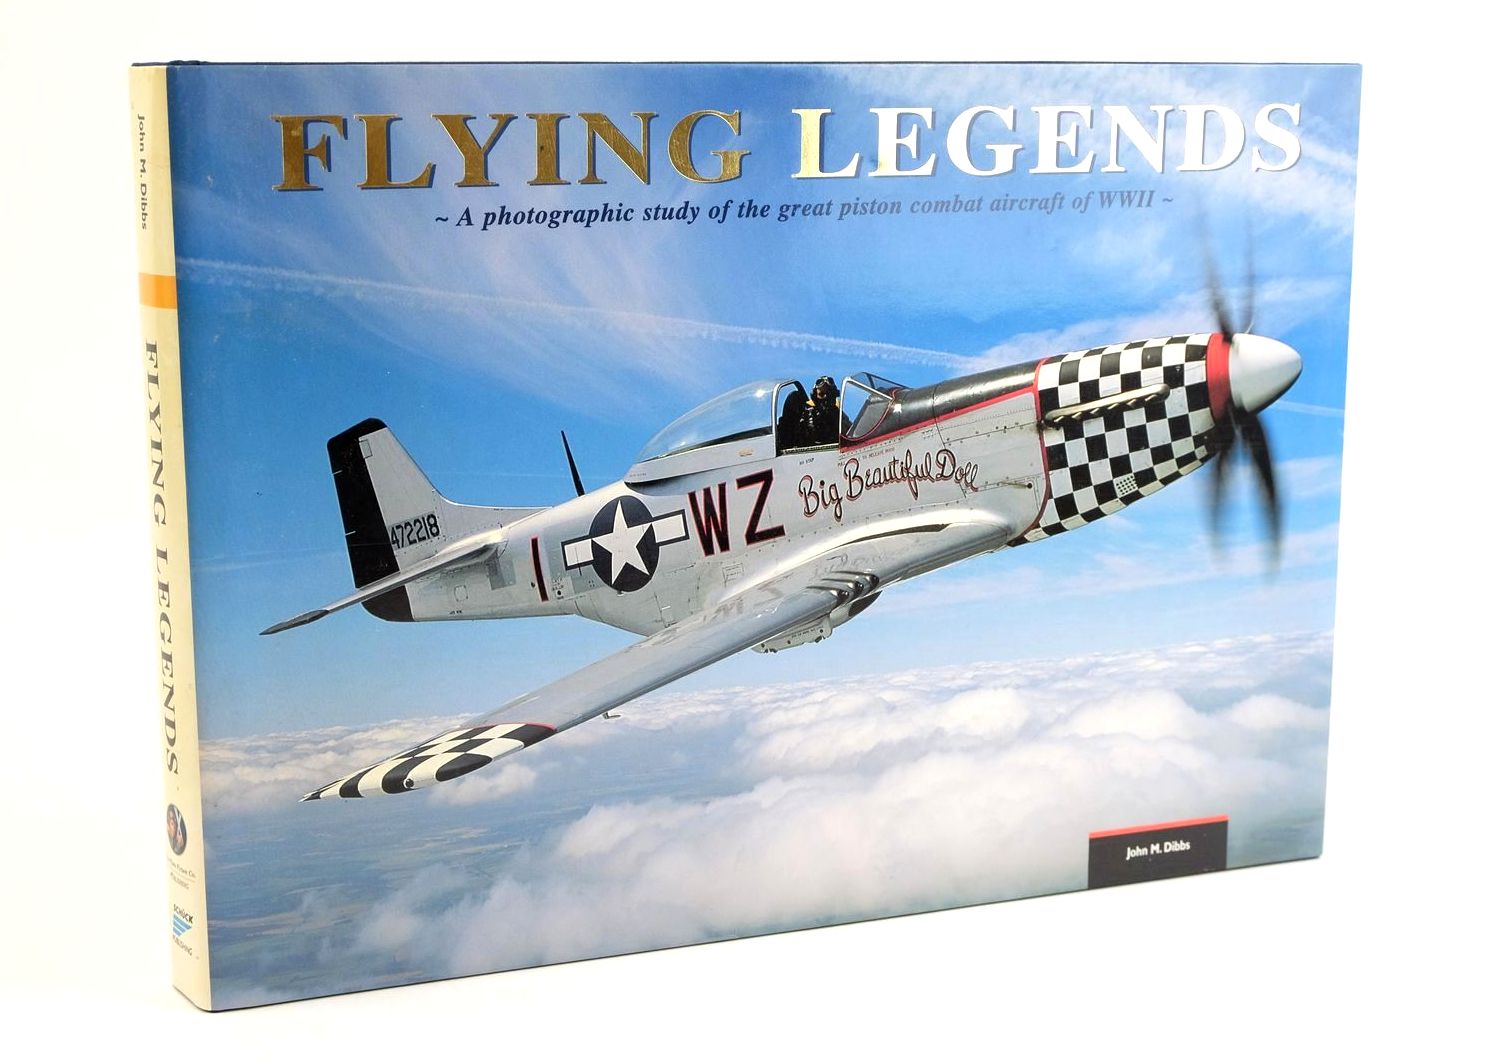 Photo of FLYING LEGENDS - A PHOTOGRAPHIC STUDY OF THE GREAT PISTON COMBAT AIRCRAFT OF WWII written by Holmes, Tony illustrated by Dibbs, John M. published by The Plane Picture Co. Publishing (STOCK CODE: 1323630)  for sale by Stella & Rose's Books